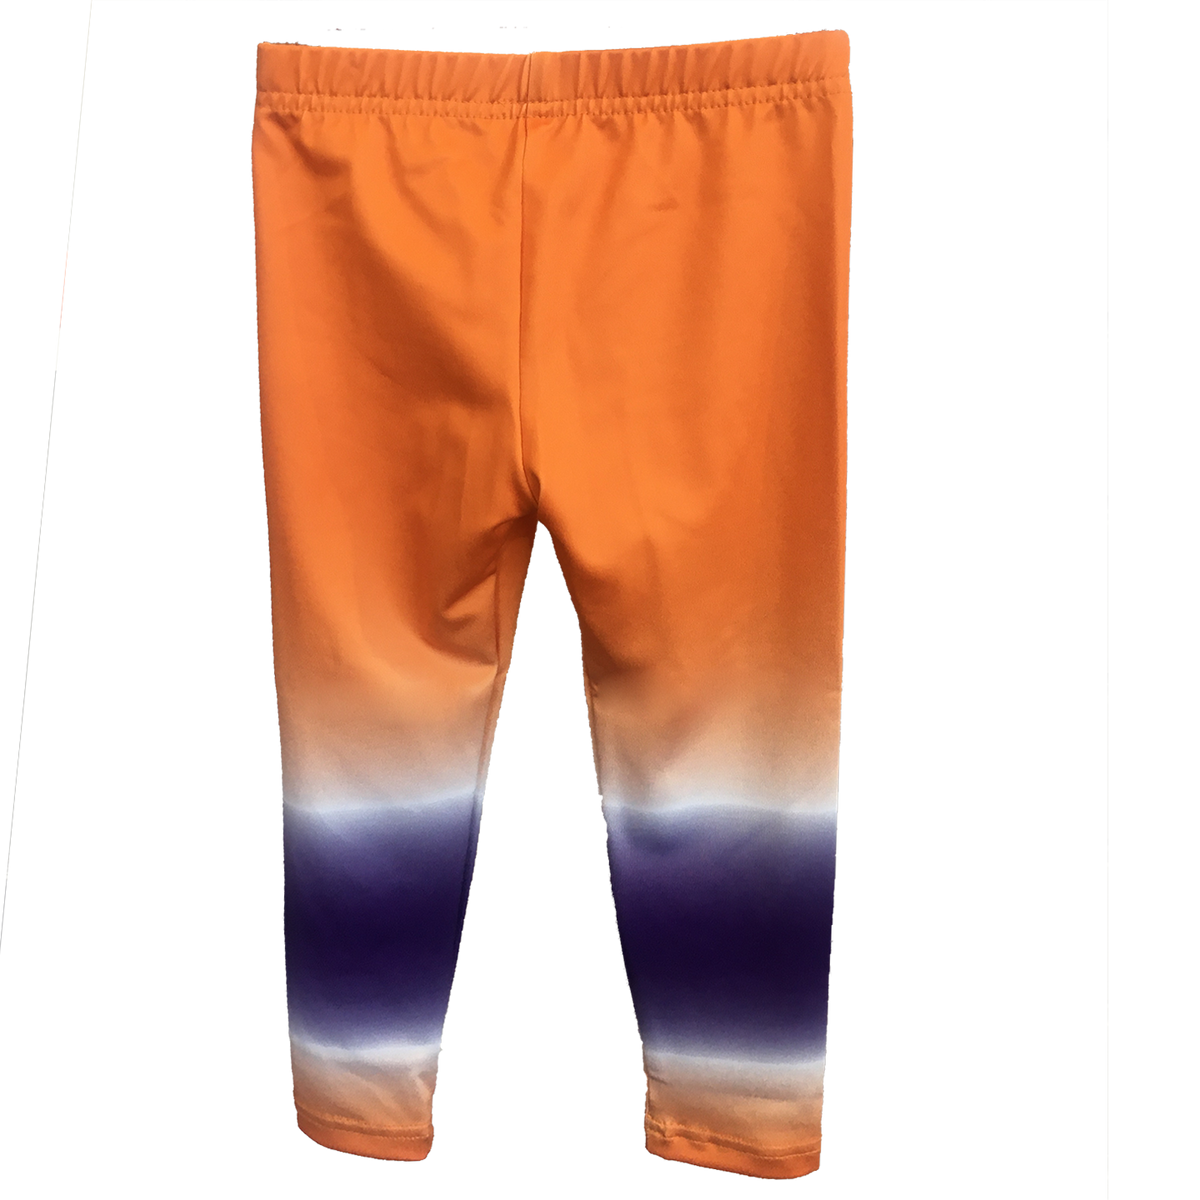 Clemson Tigers Leggings with Orange and Purple Tie-Dye and white Paw - Girls